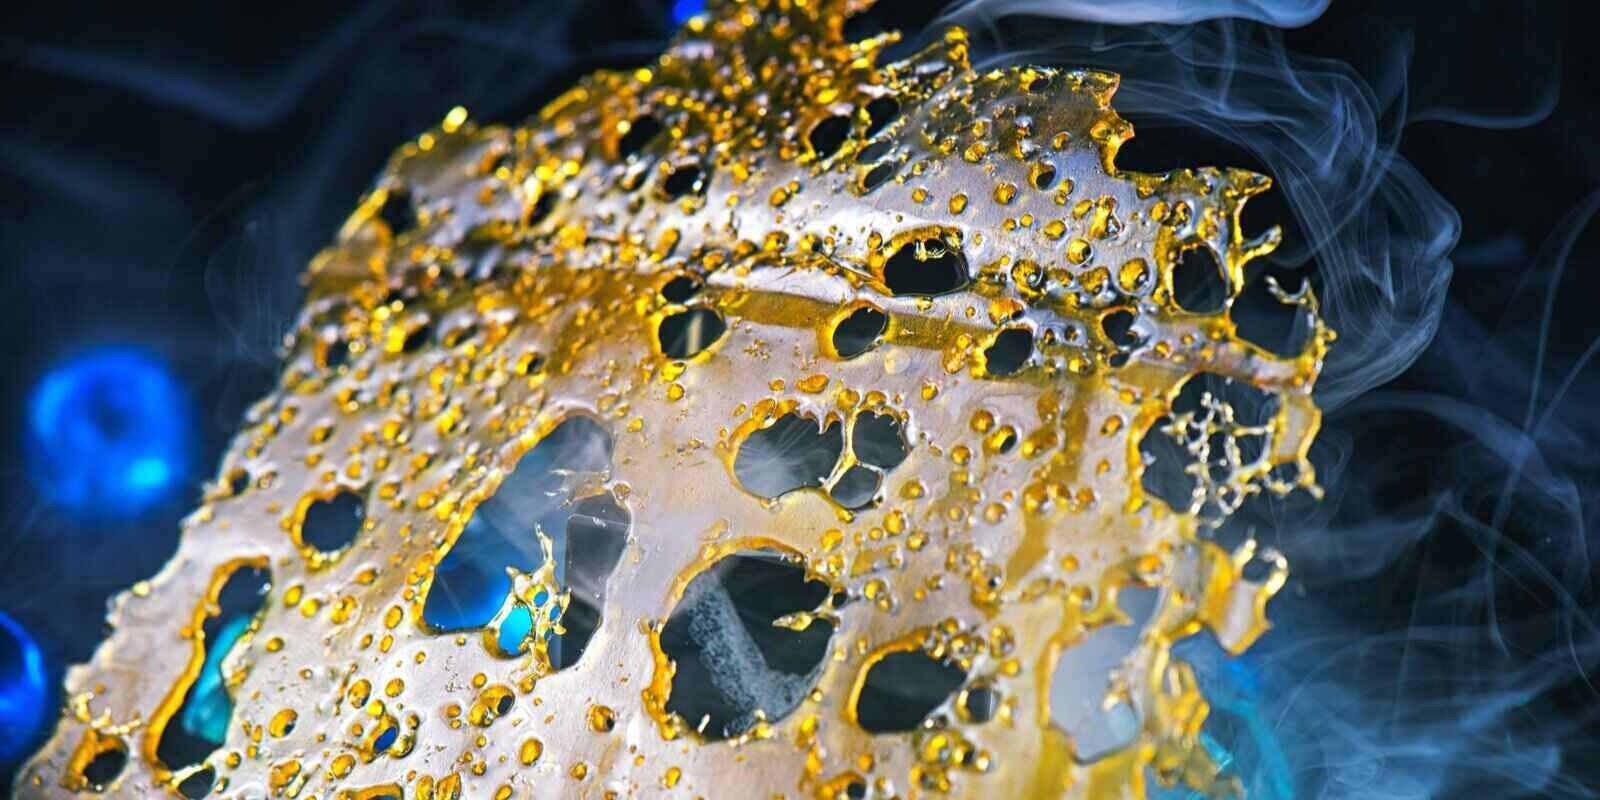 macro detail of cannabis oil concentrate